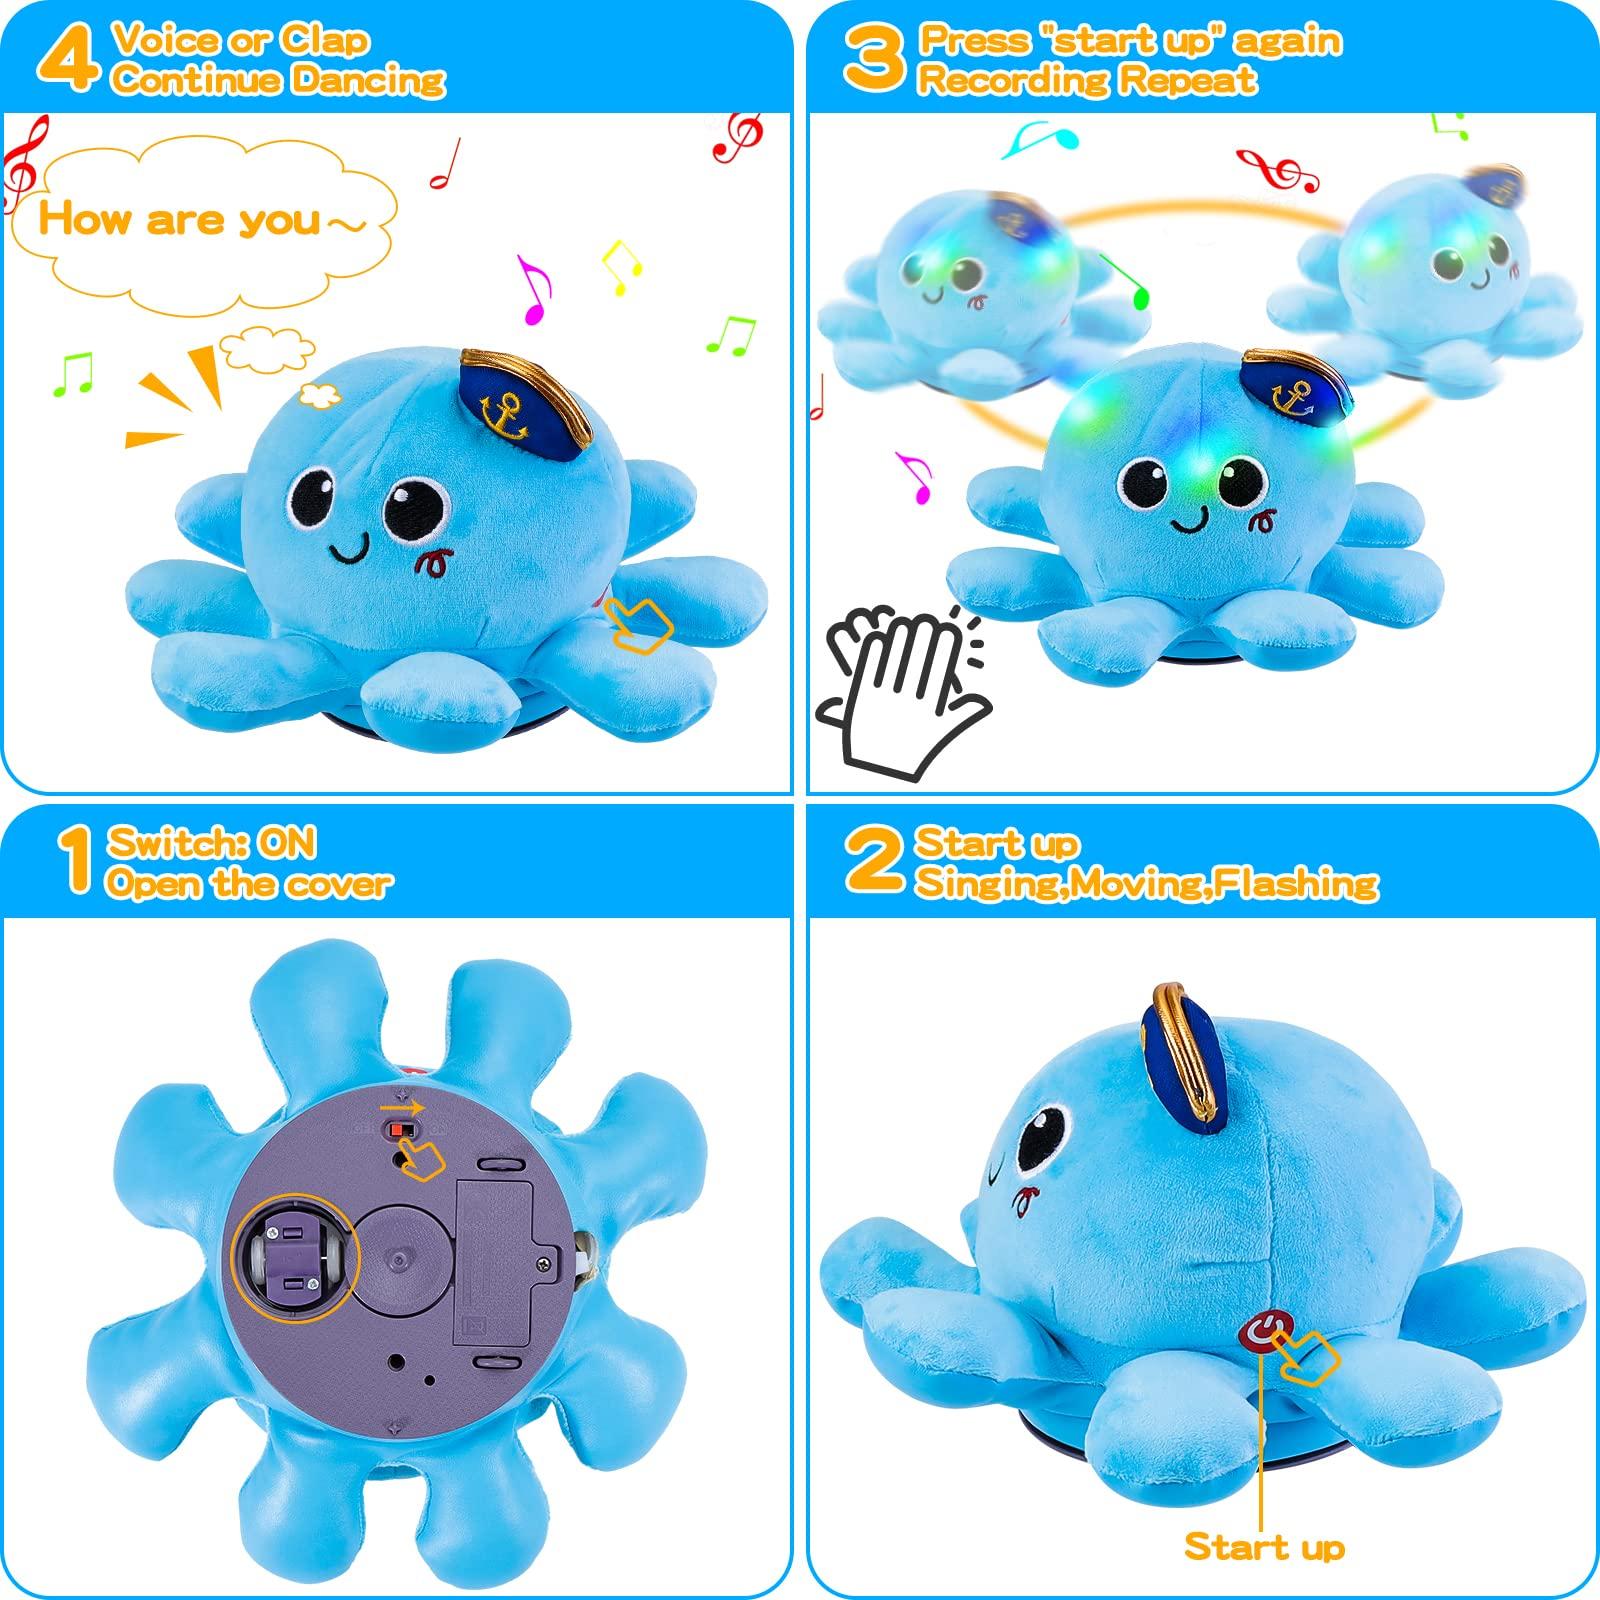 FancyWhoop Baby Musical Light Crawling Toys - Light up Dancing Spinning Walking Soft Octopus Toy for Boys Girls Kids, Sensory Interactive Baby Gifts for Toddlers 4